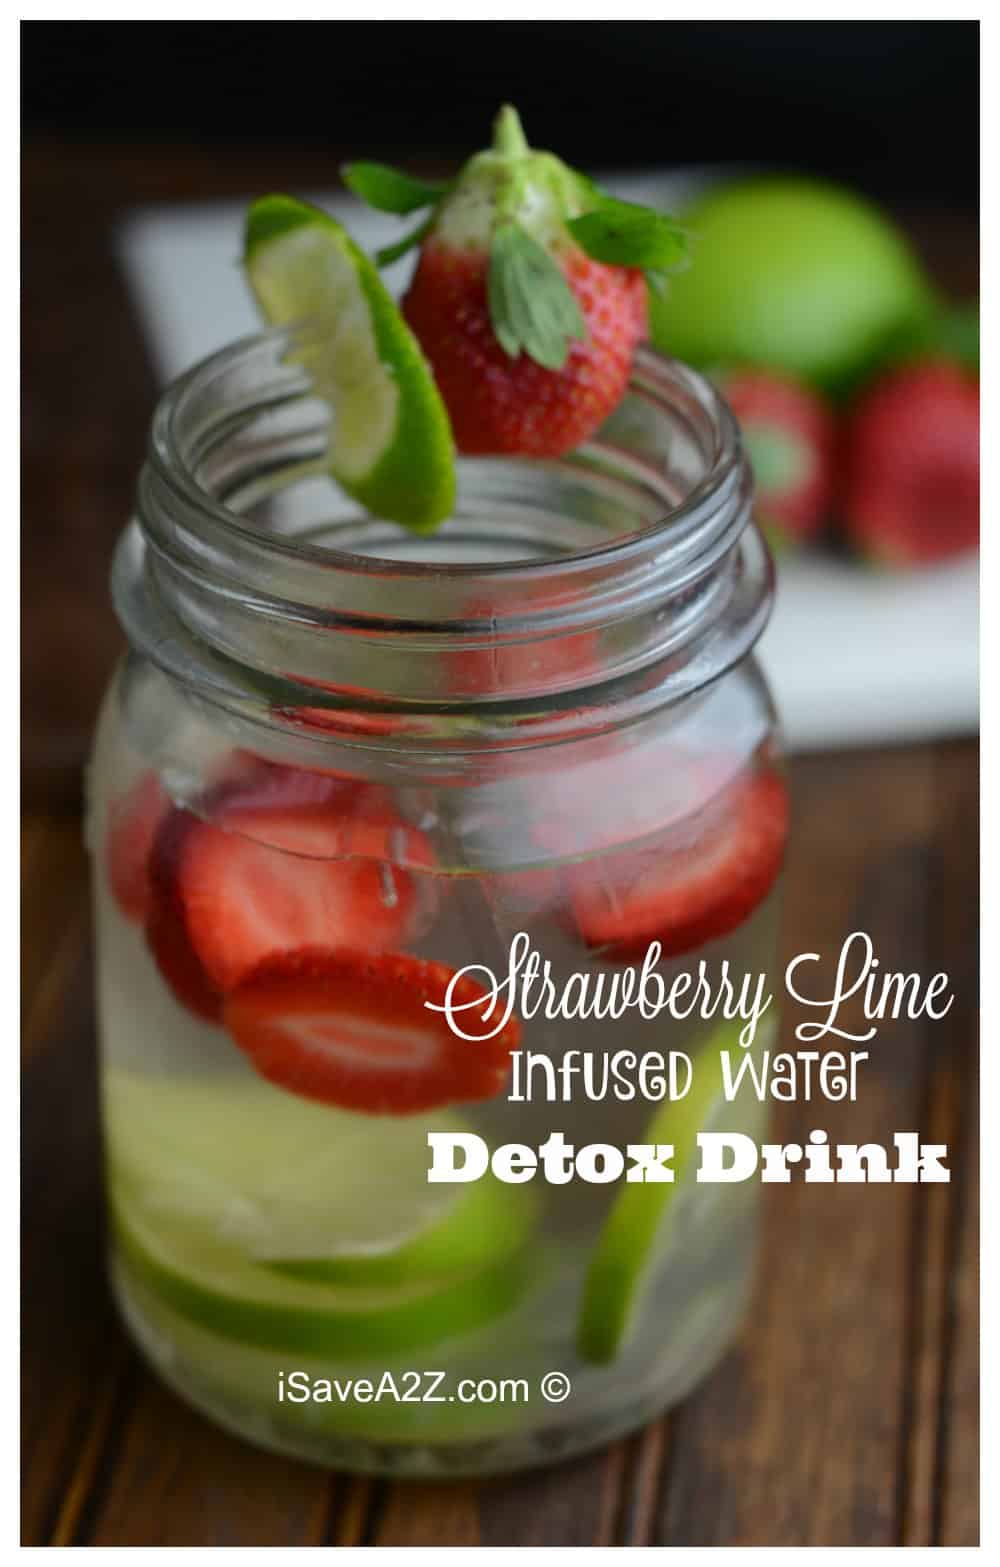 Strawberry Lime Infused Water Detox Drink